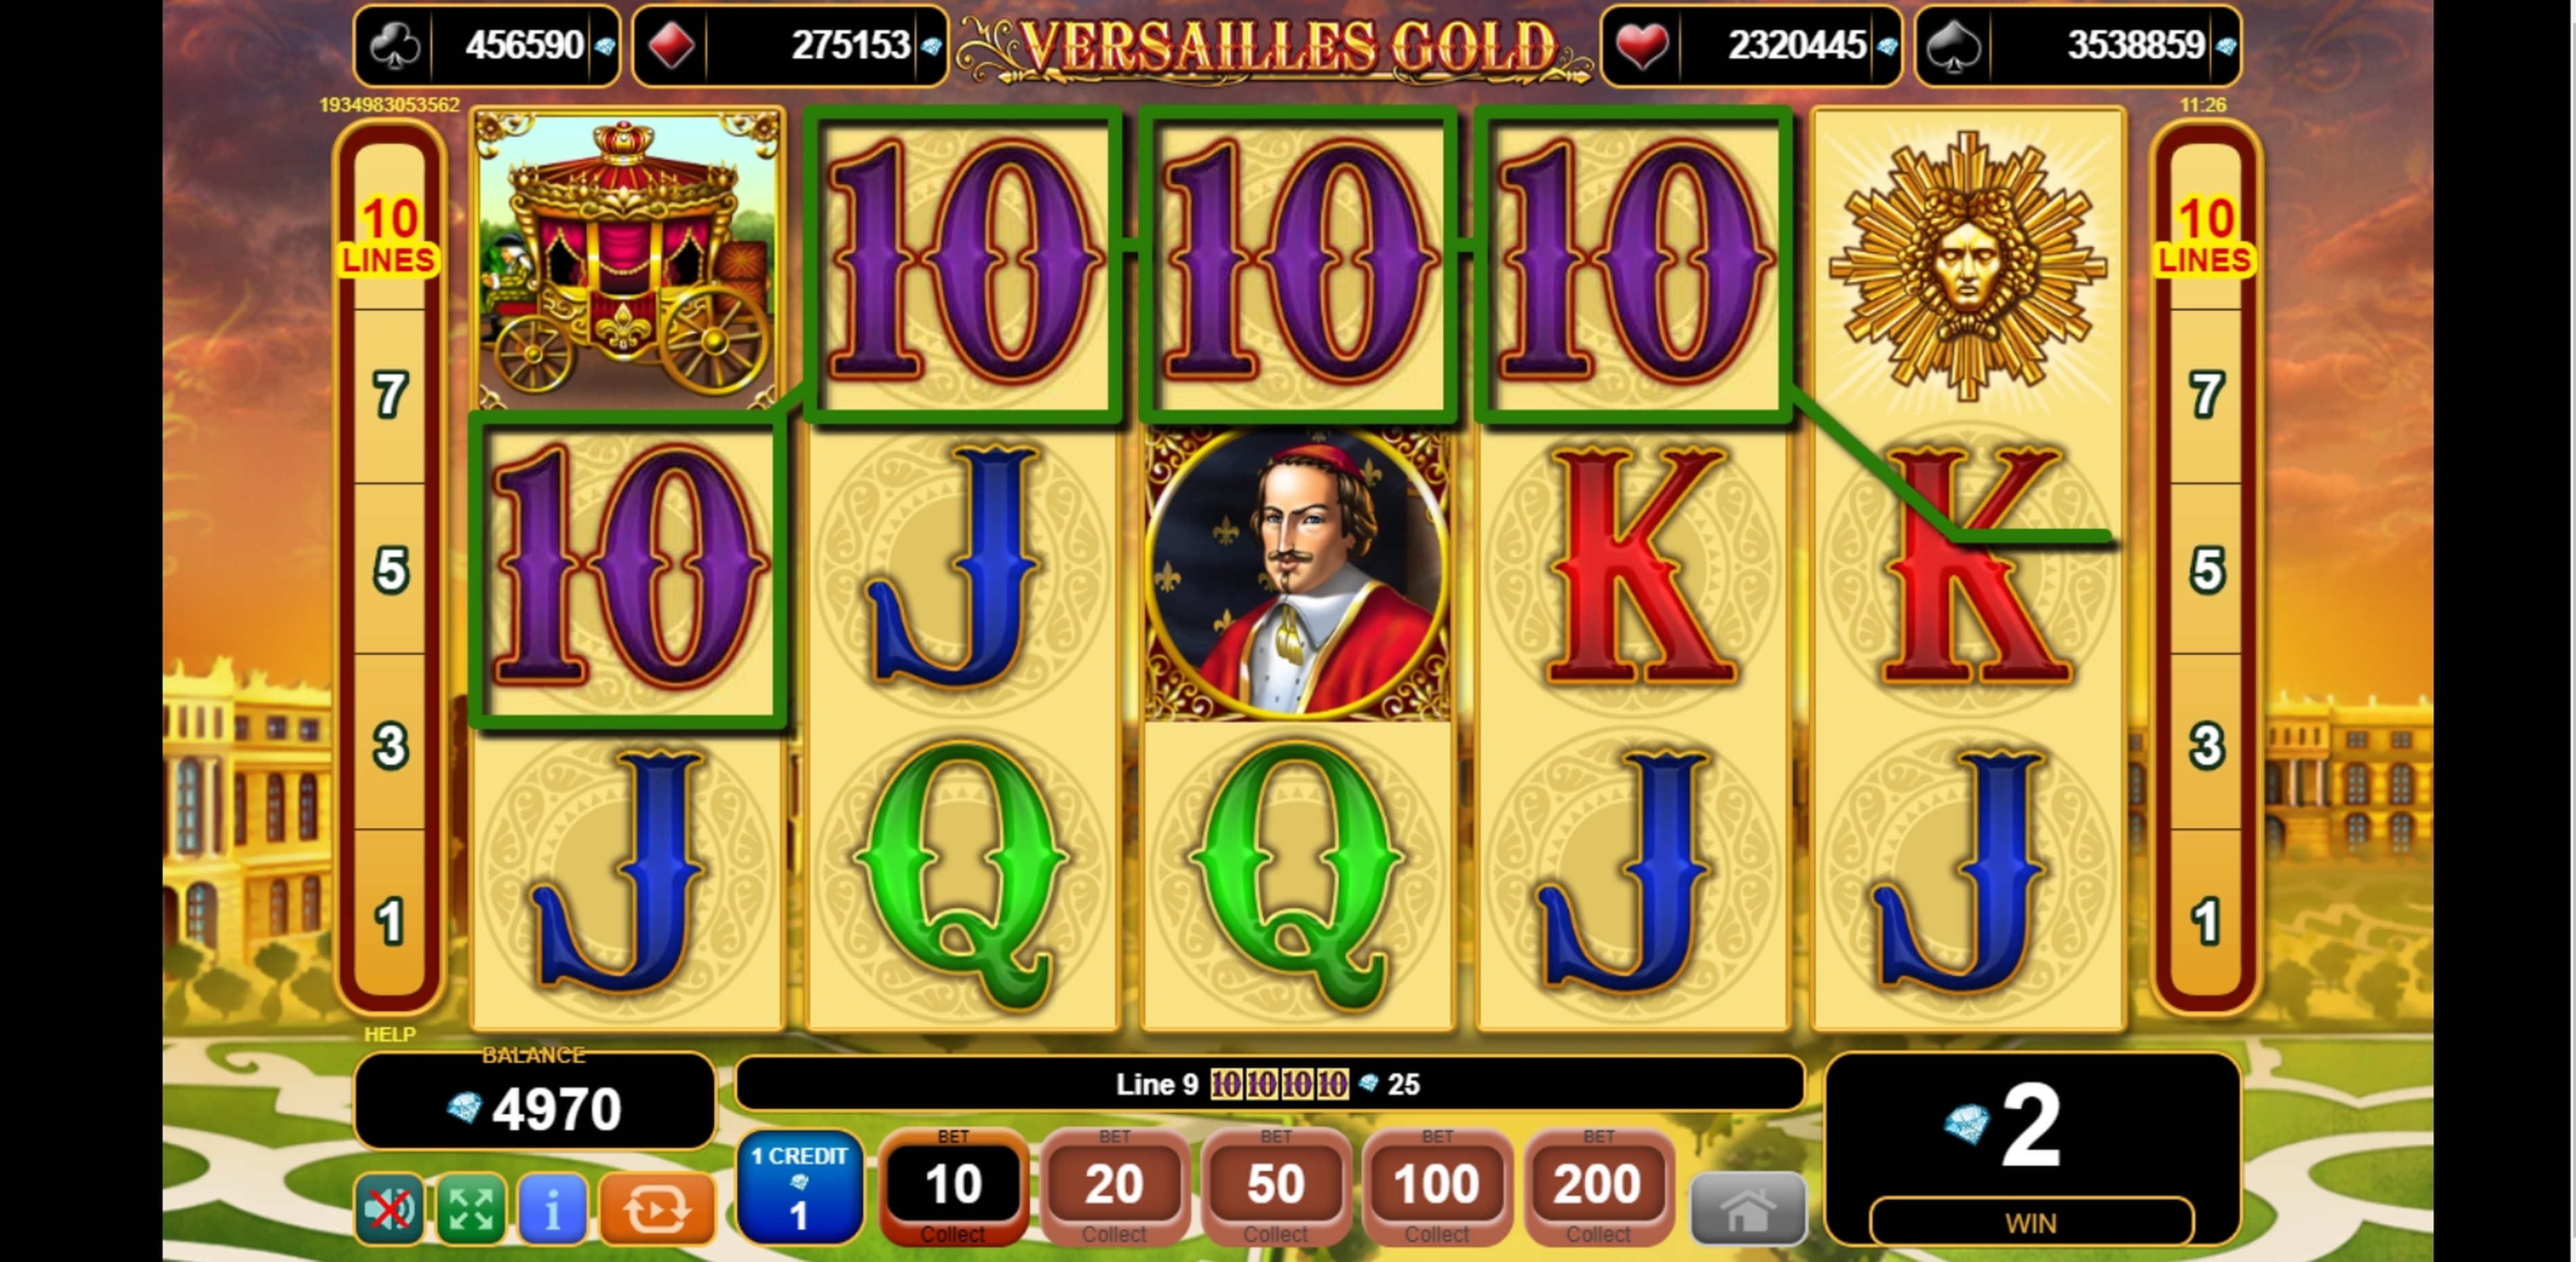 Win Money in Versailles Gold Free Slot Game by EGT